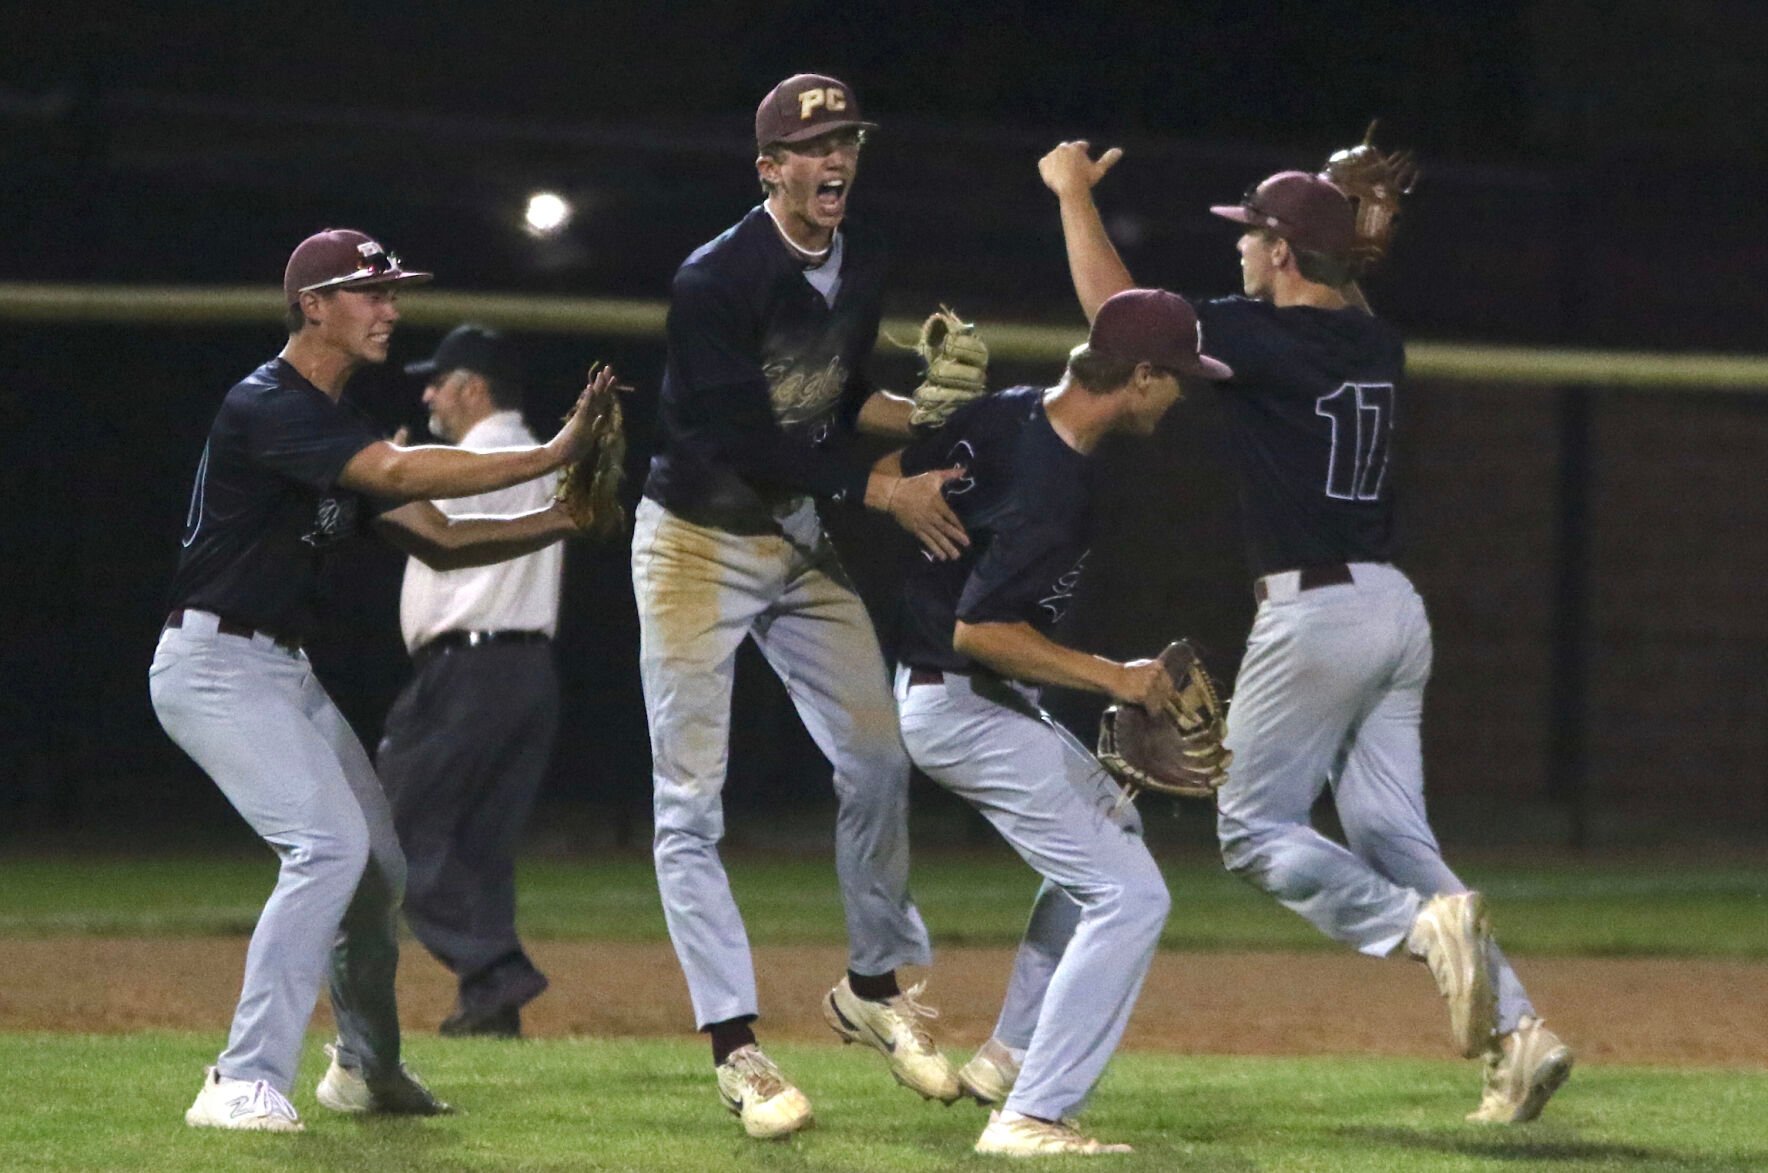 Eagles upset No. 1 Van Meter in extras to earn first state berth